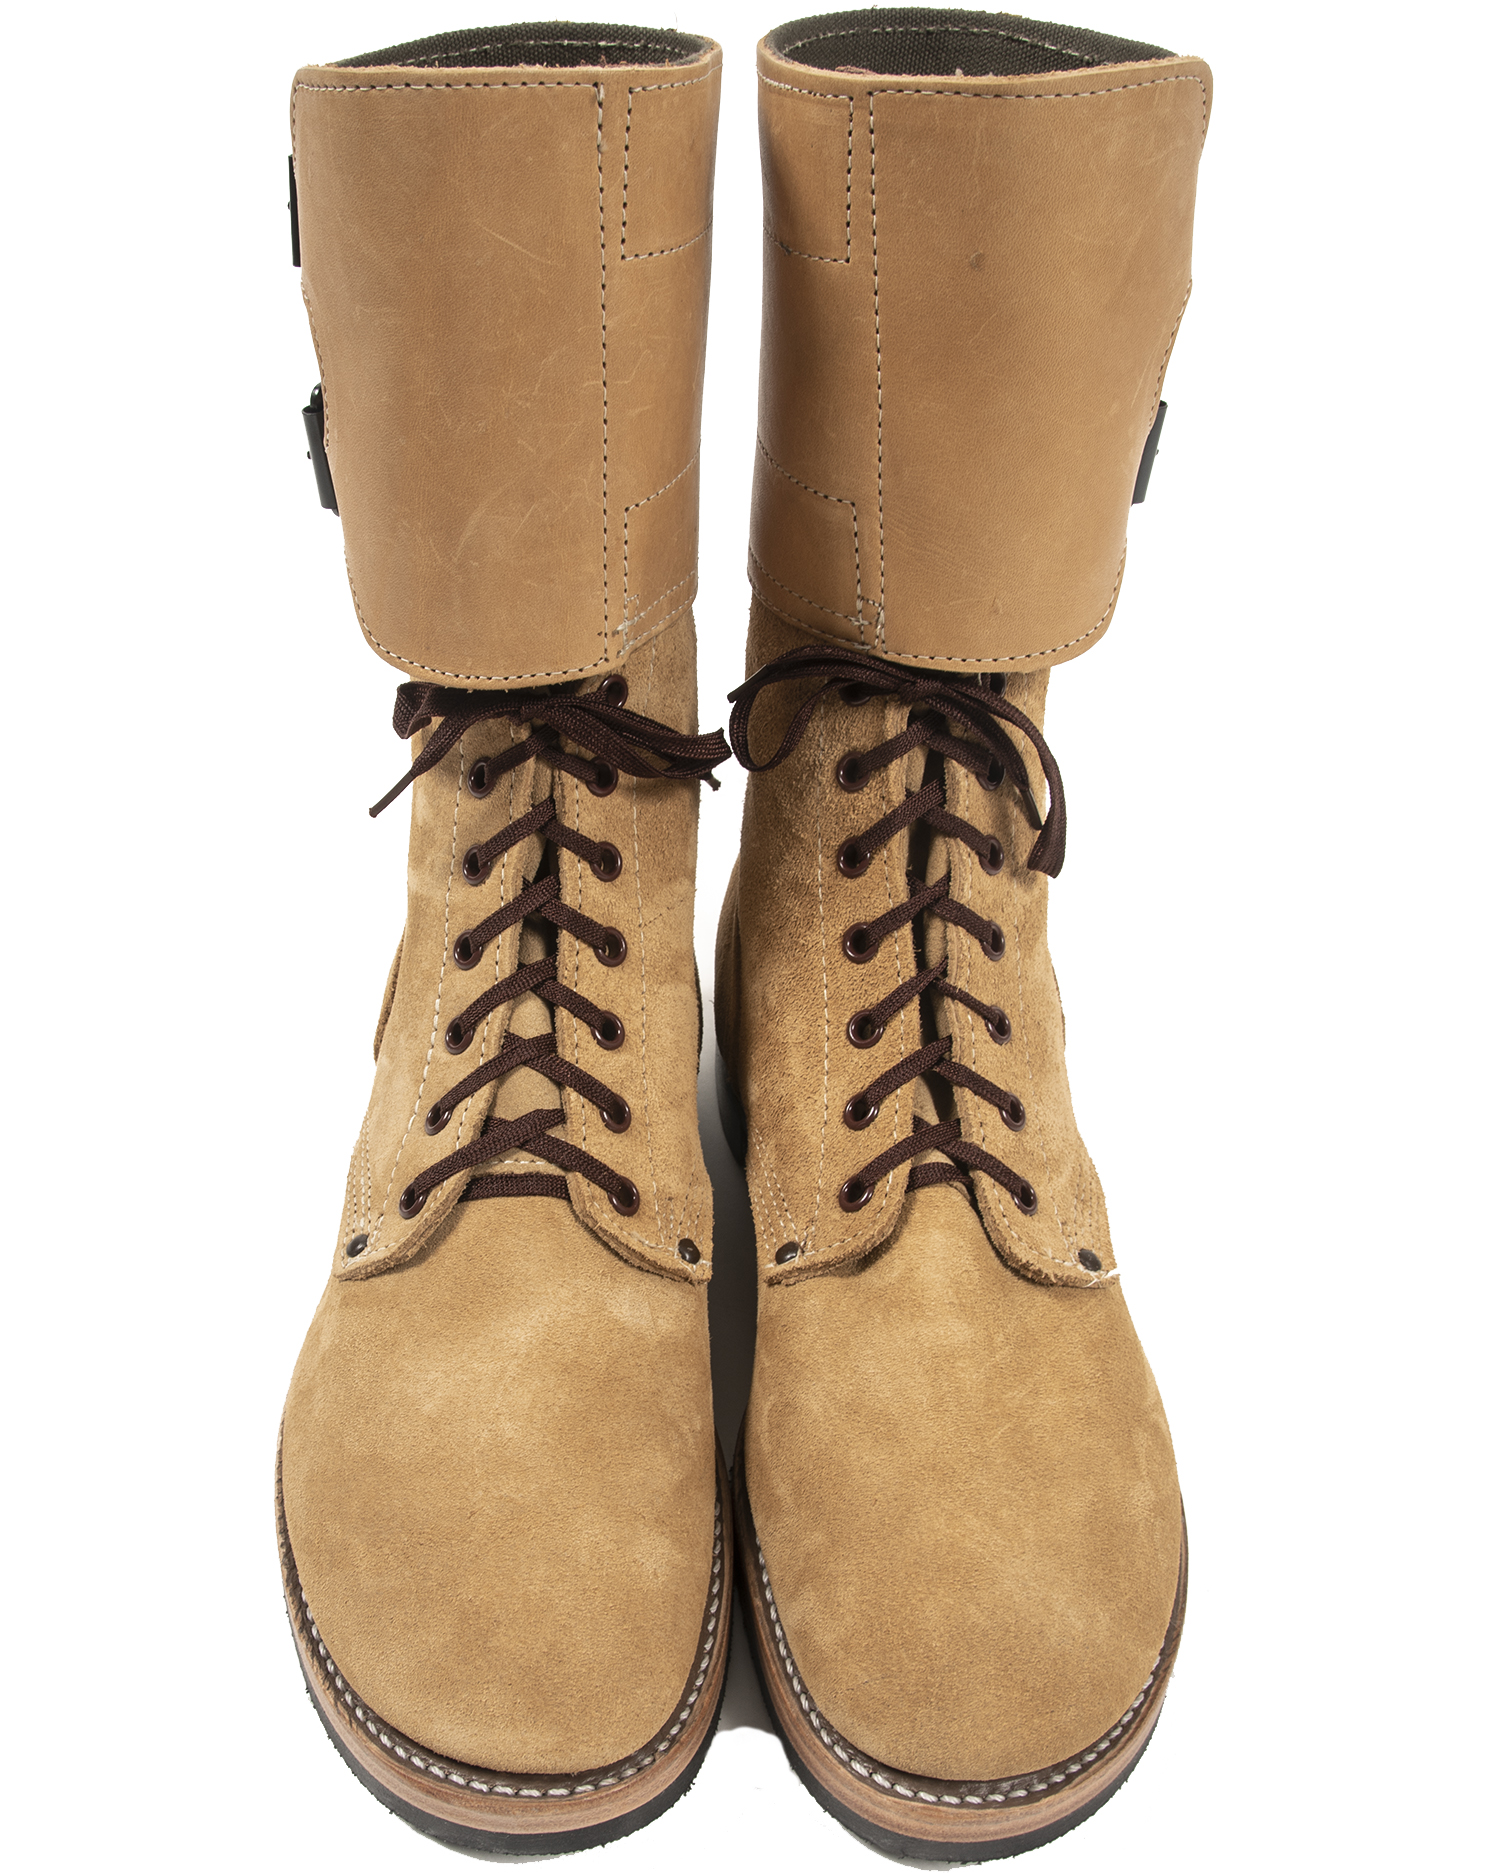 Reproduction Combat Service Boots, made in USA